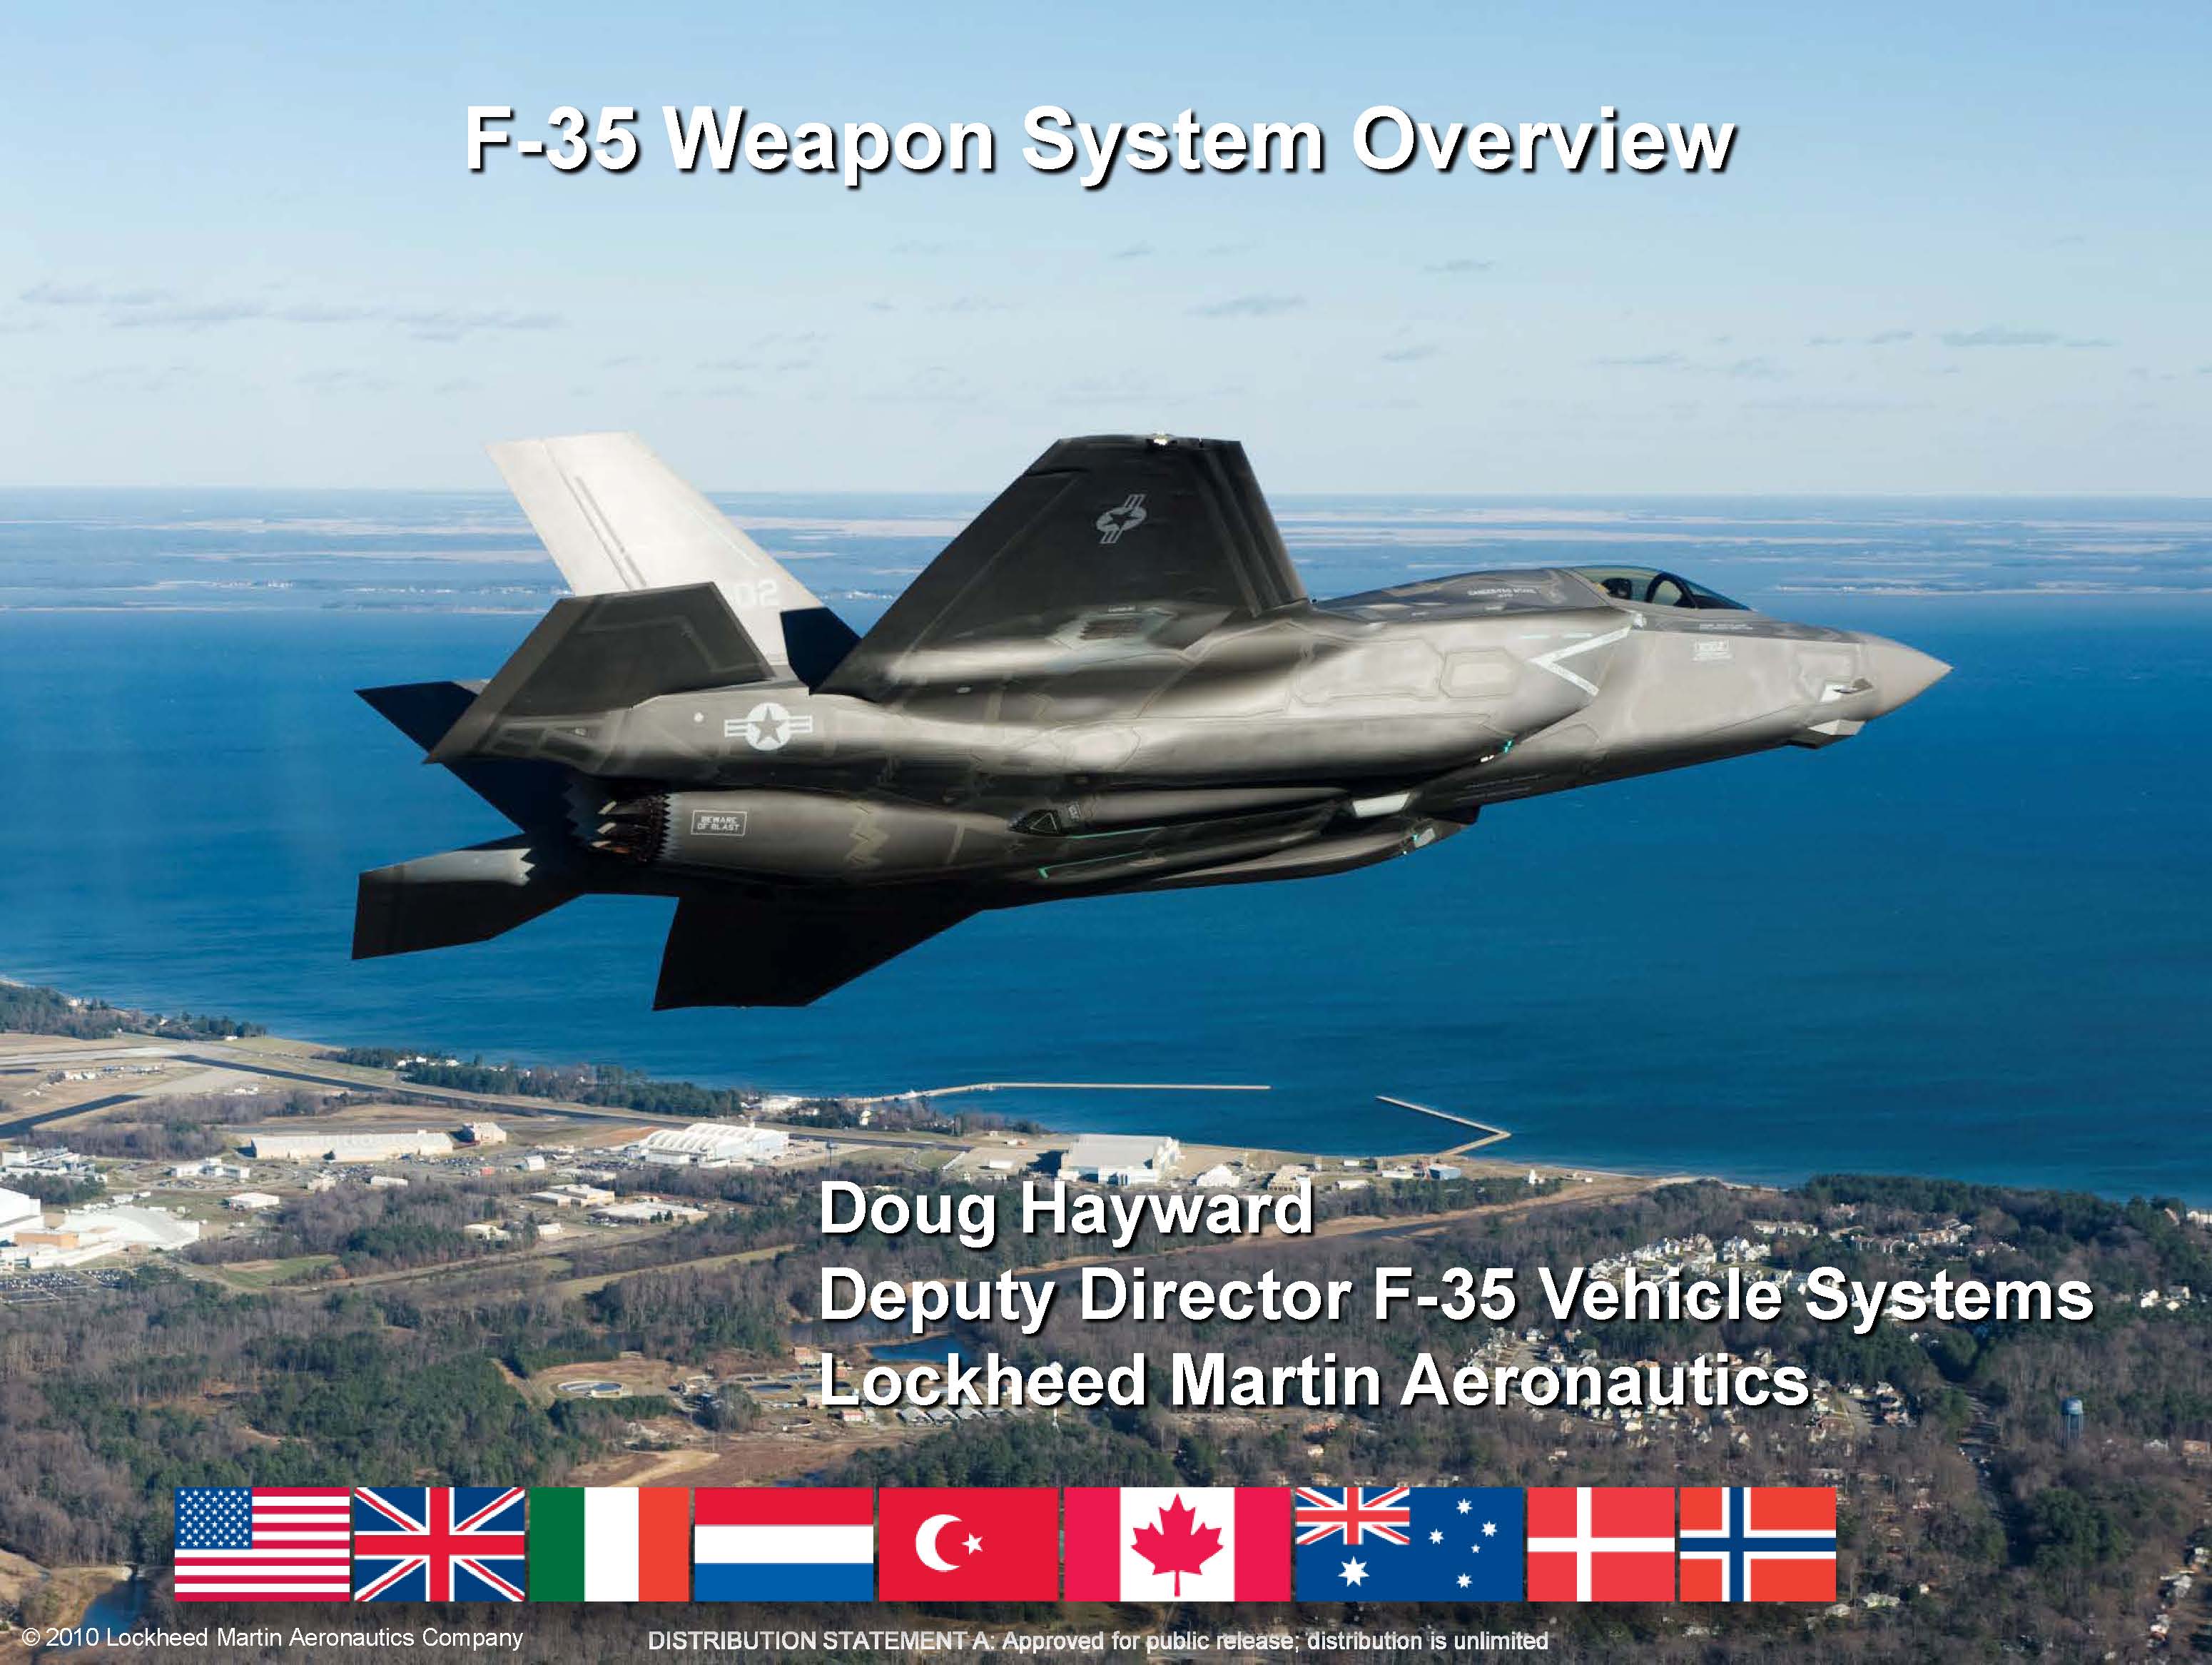 USA - F-35 Weapon System Overview.jpg